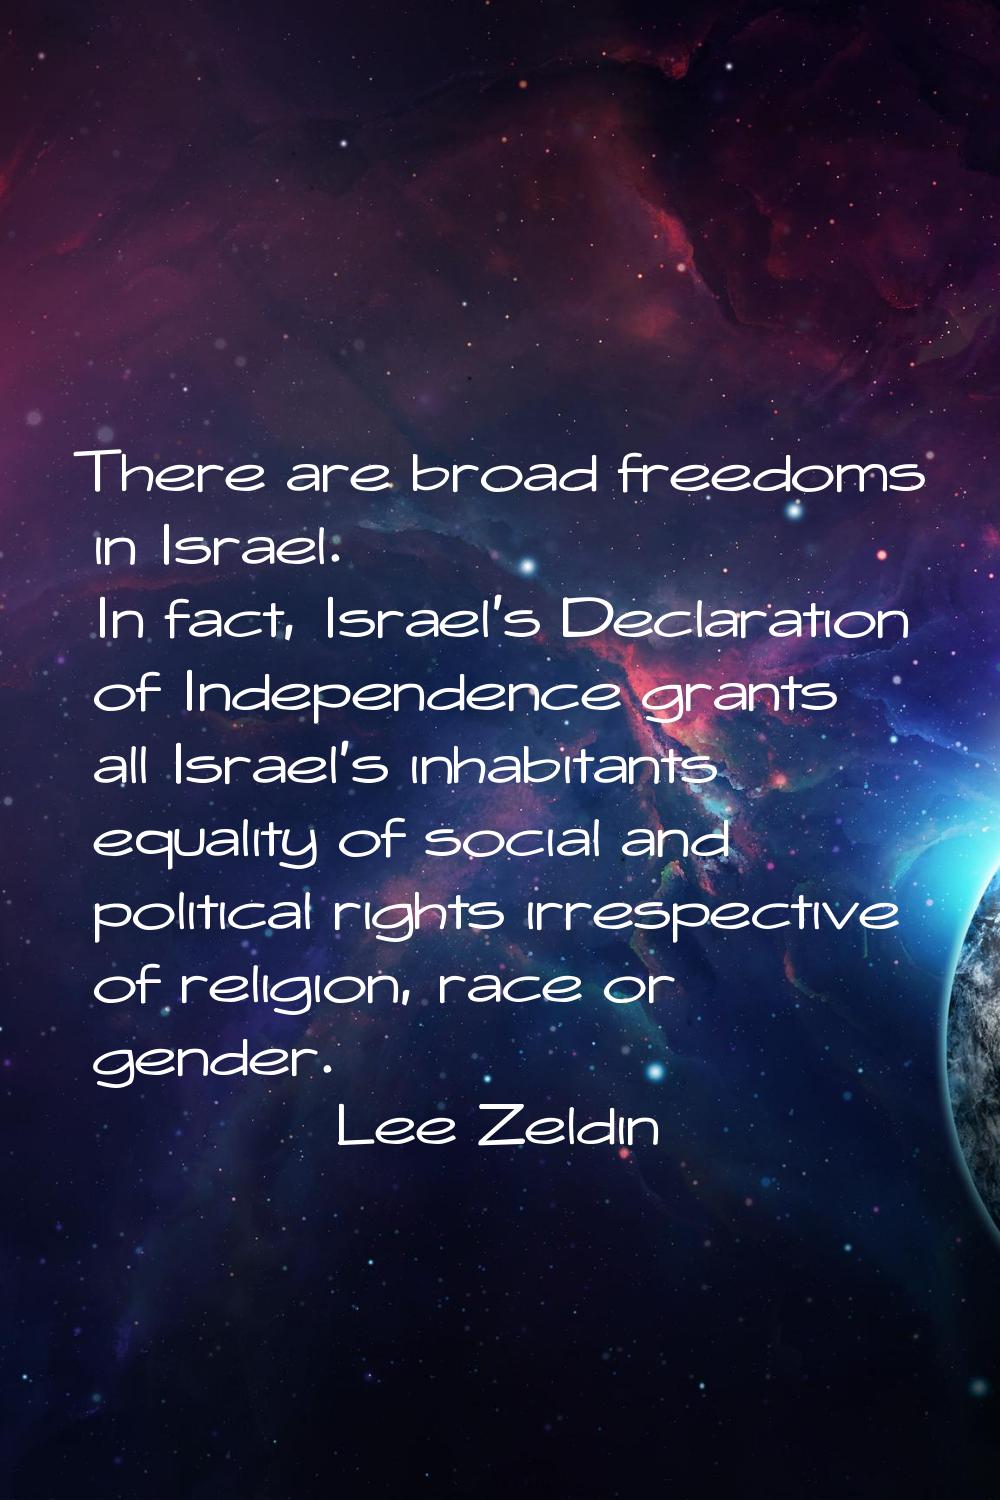 There are broad freedoms in Israel. In fact, Israel's Declaration of Independence grants all Israel